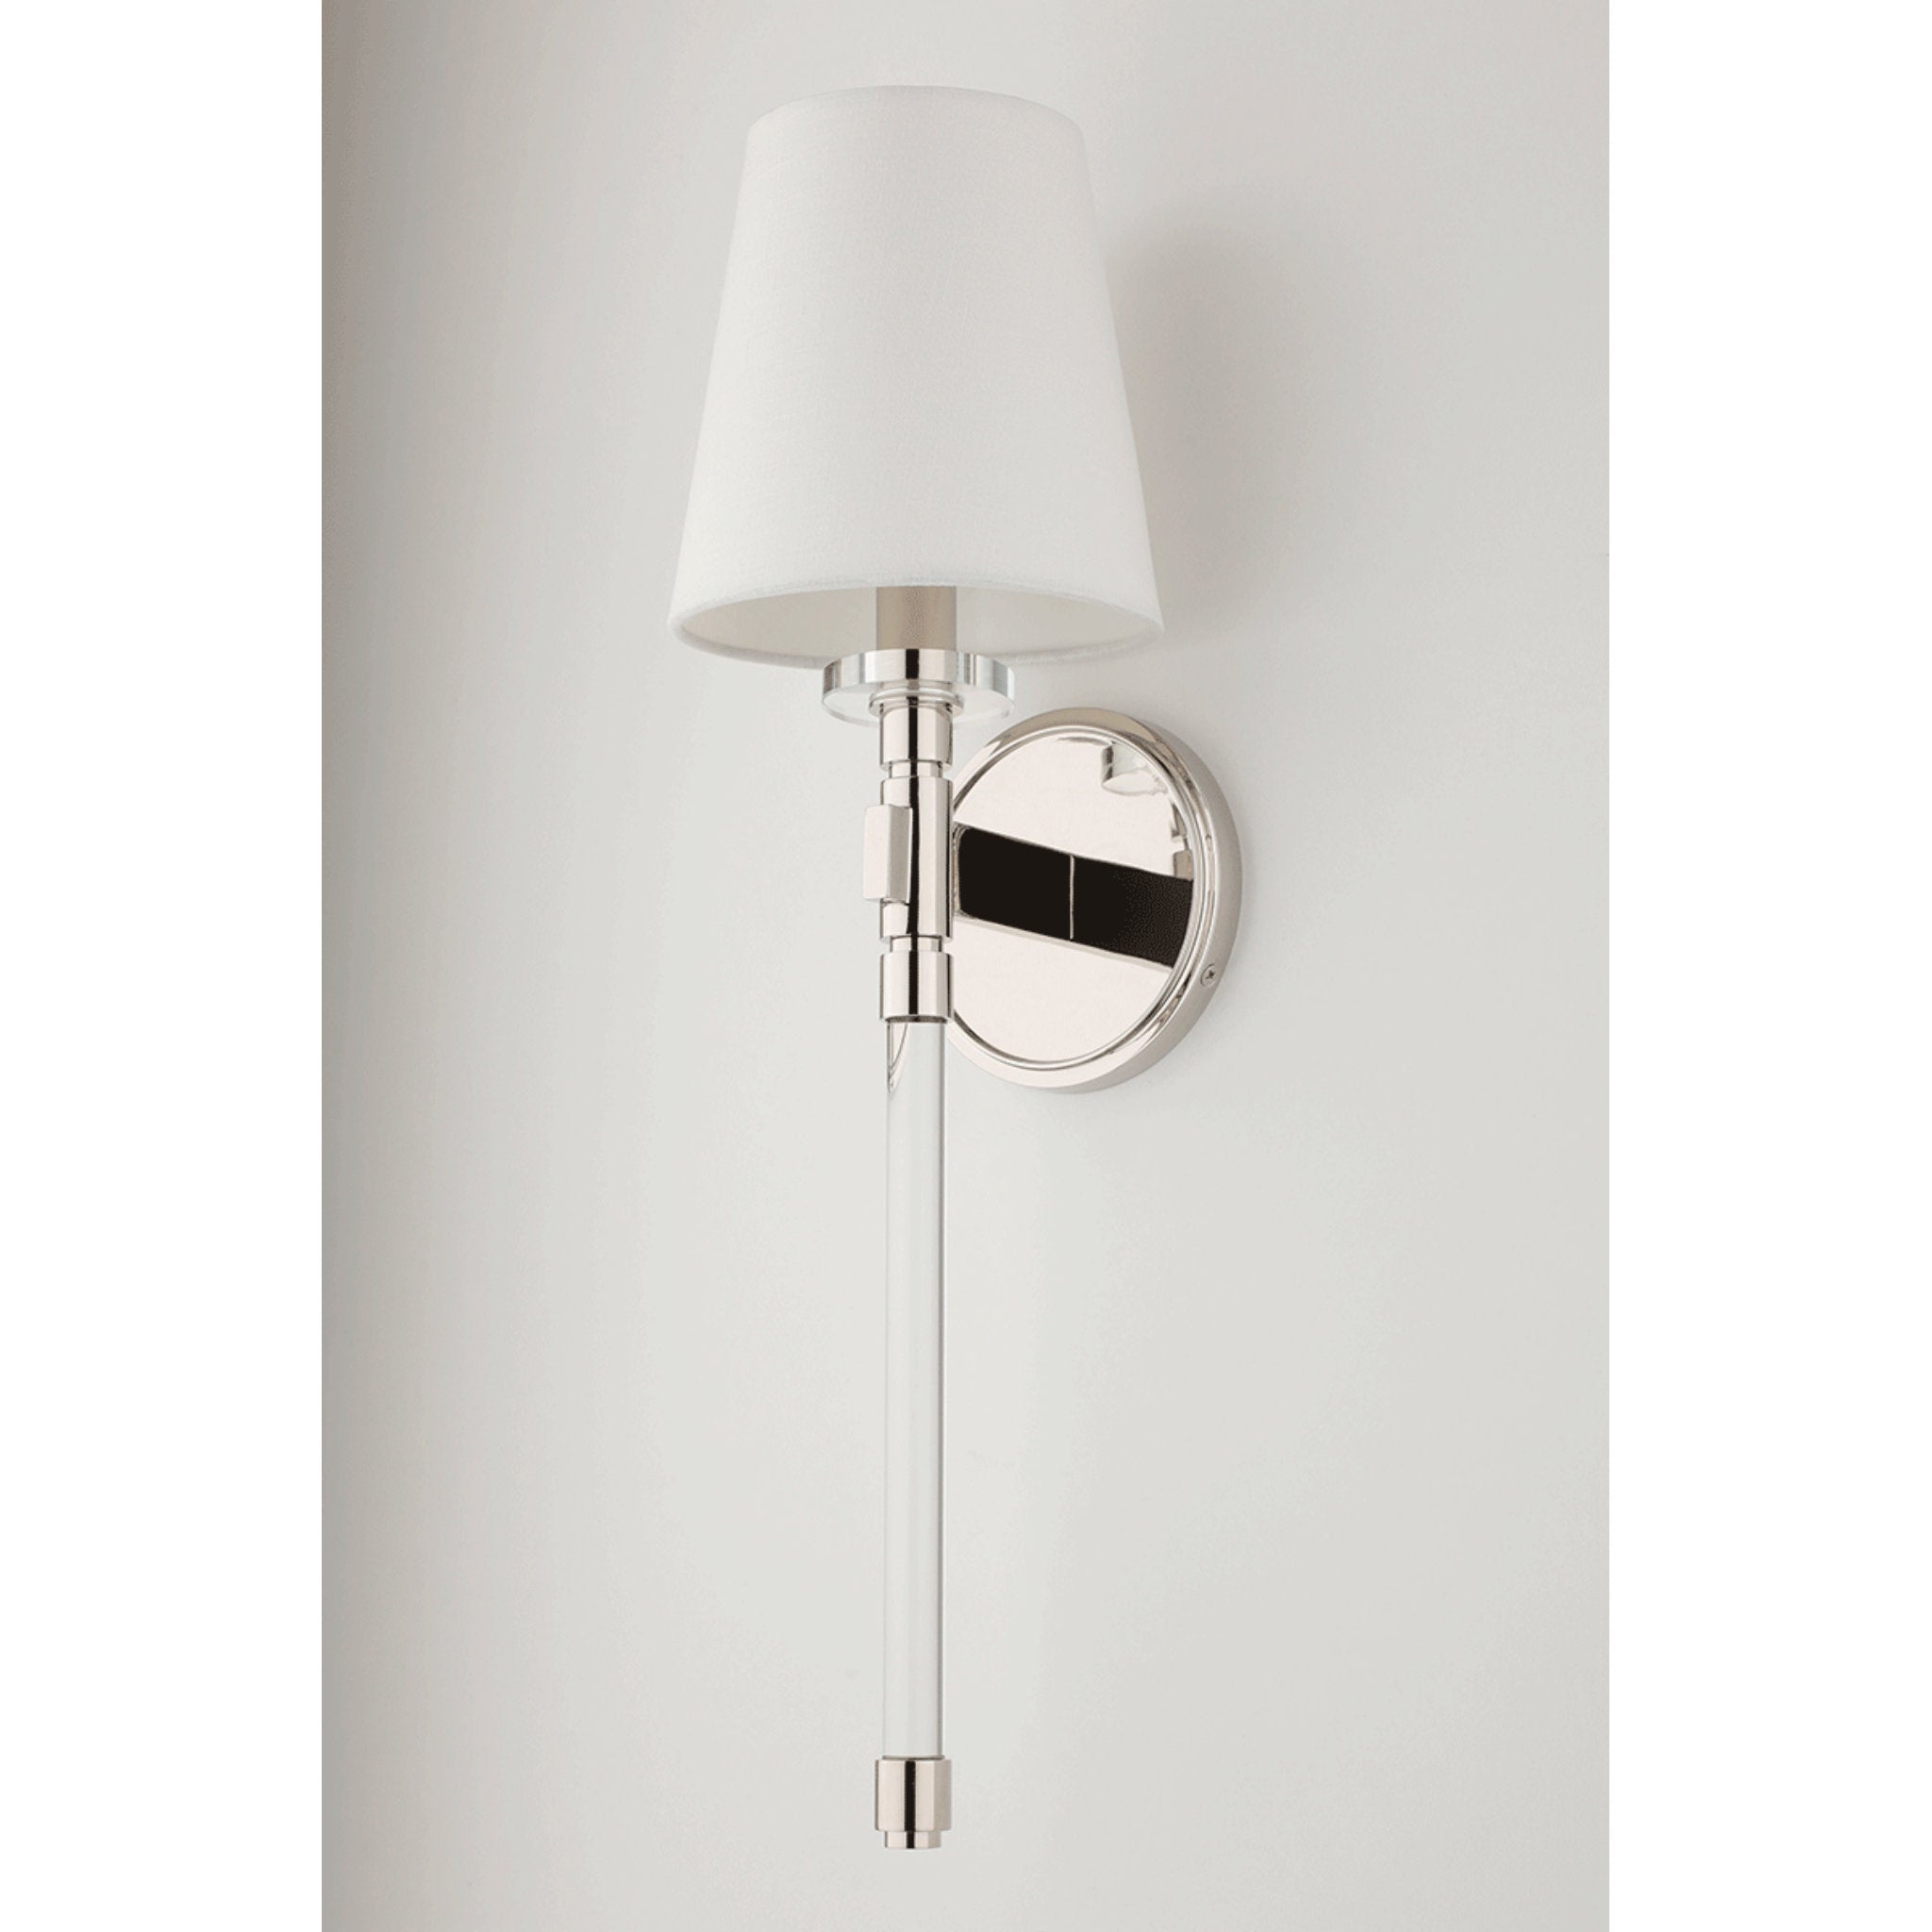 Blixen 1 Light Wall Sconce in Polished Nickel